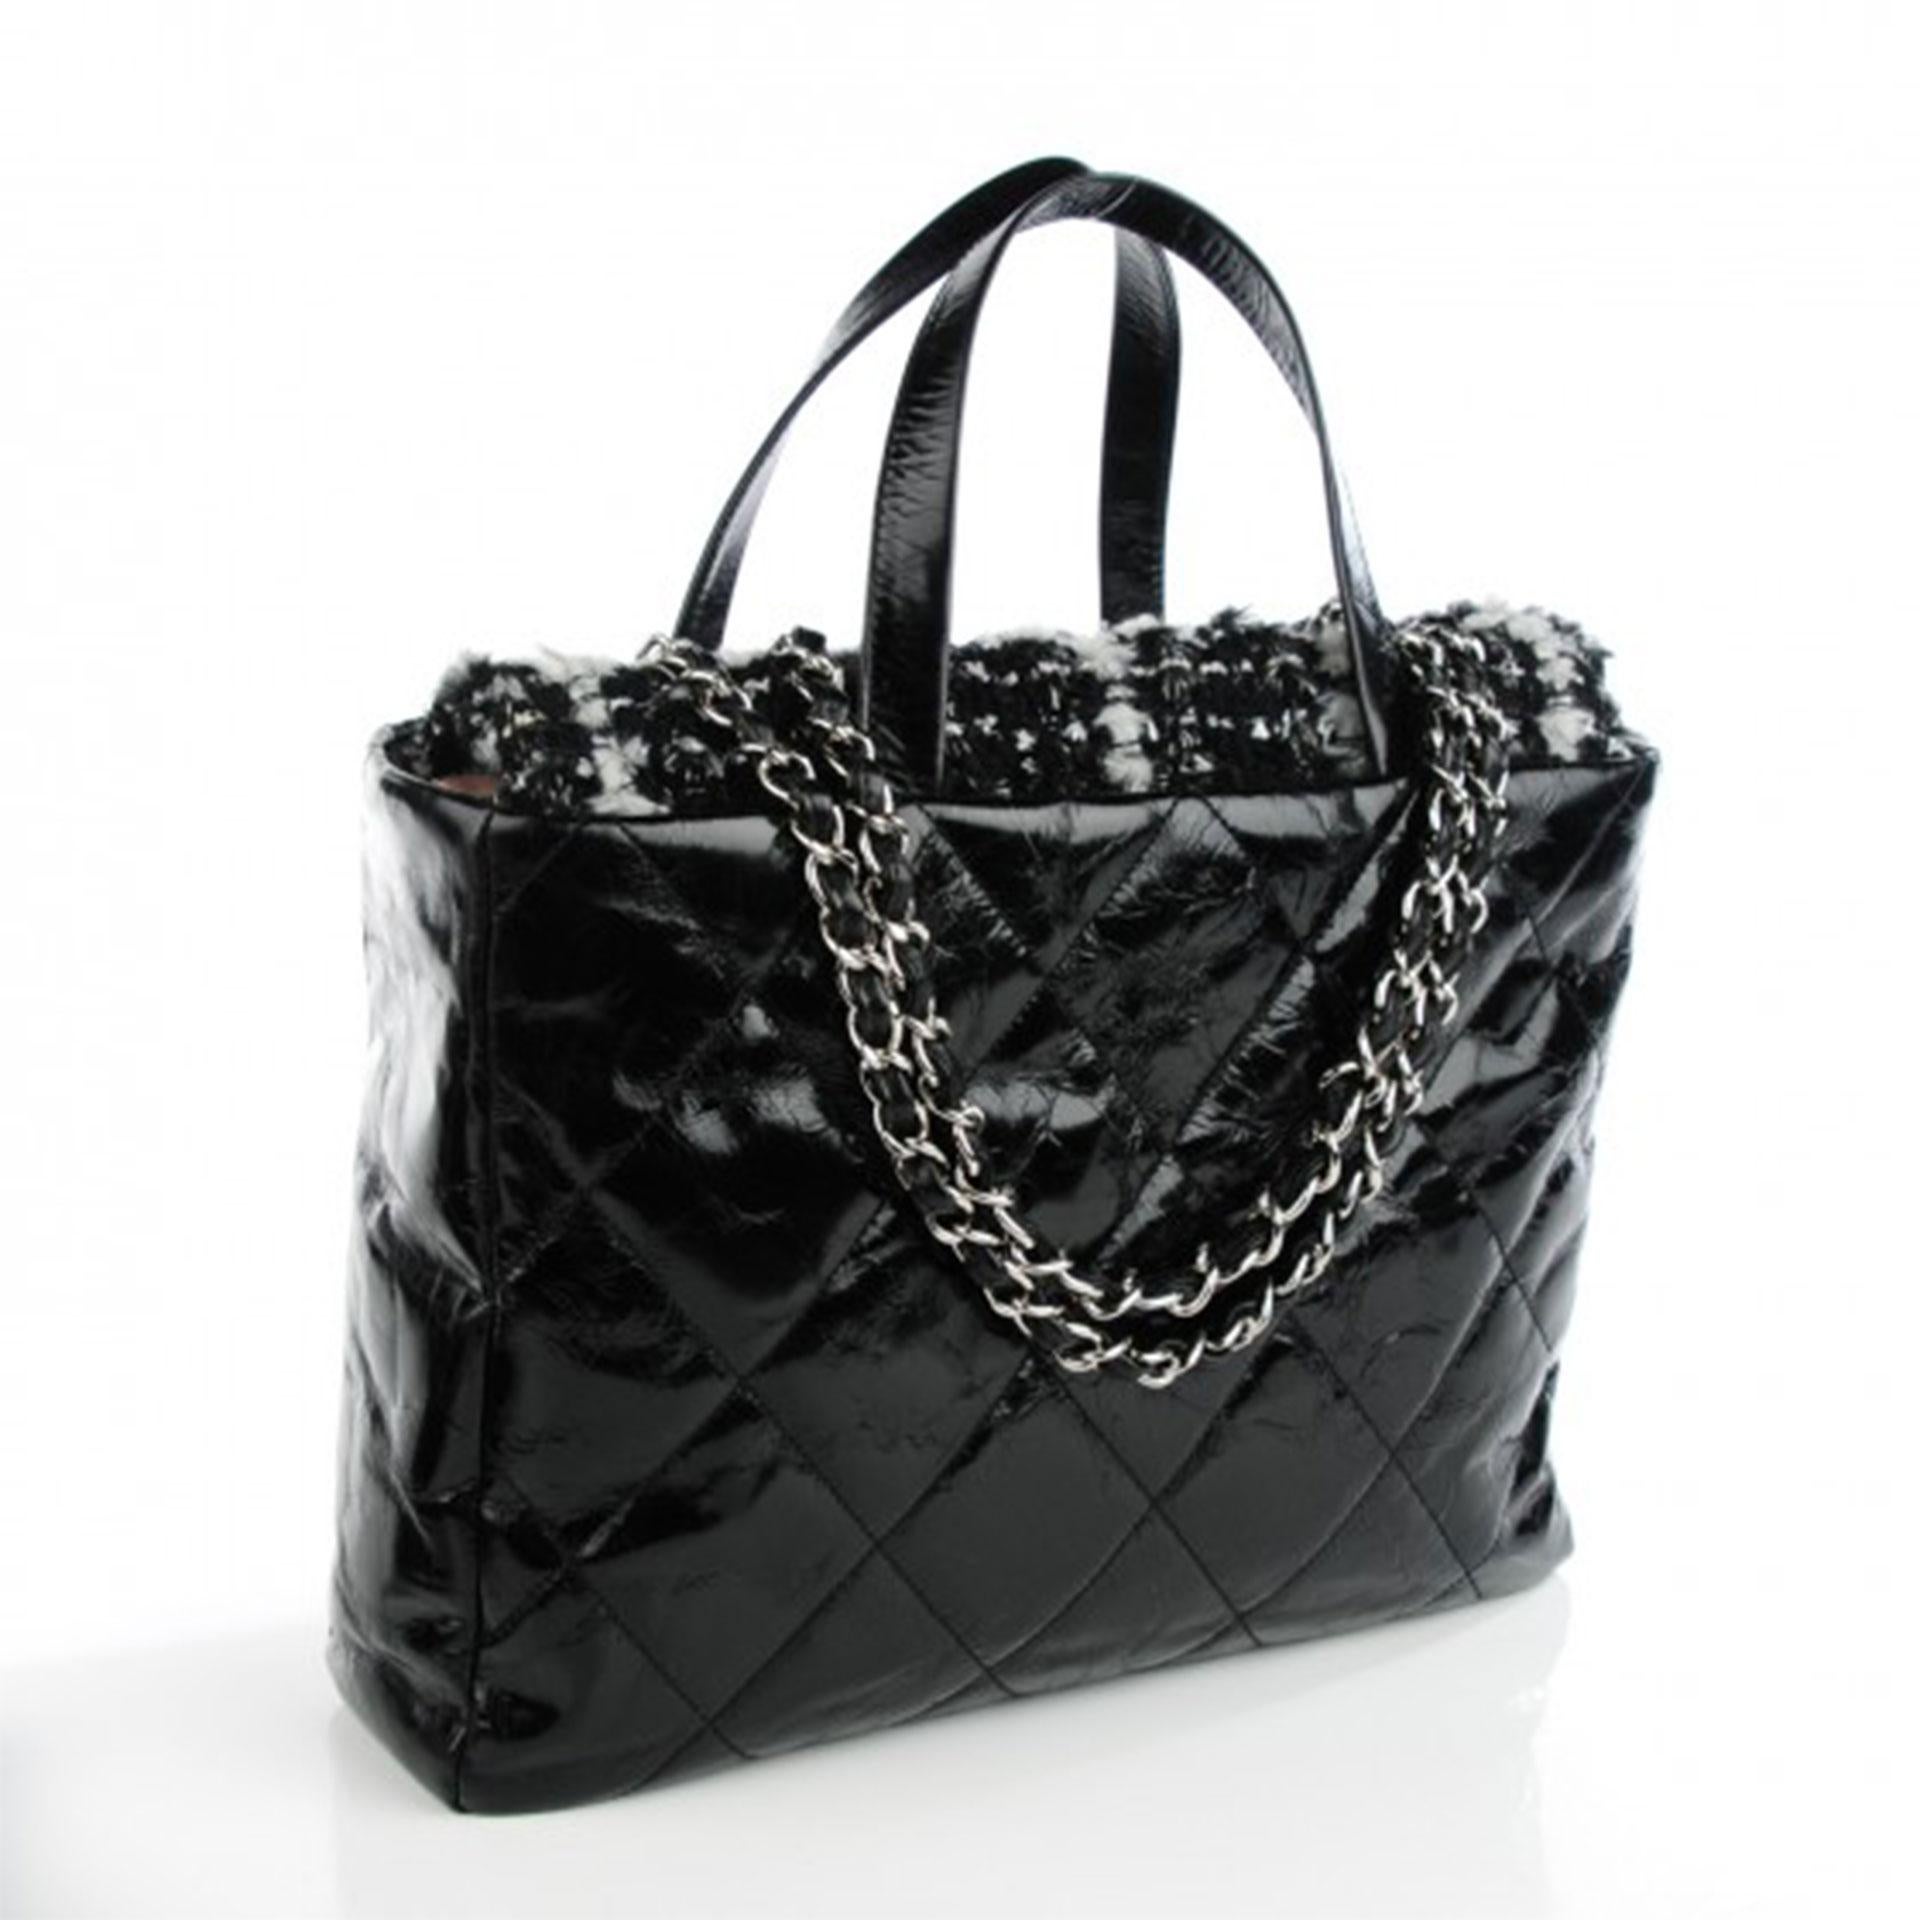 Chanel Limited Edition Soho Glazed Calfskin Quilted Tweed Flight Travel Tote Bag

This is a limited edition bag with 